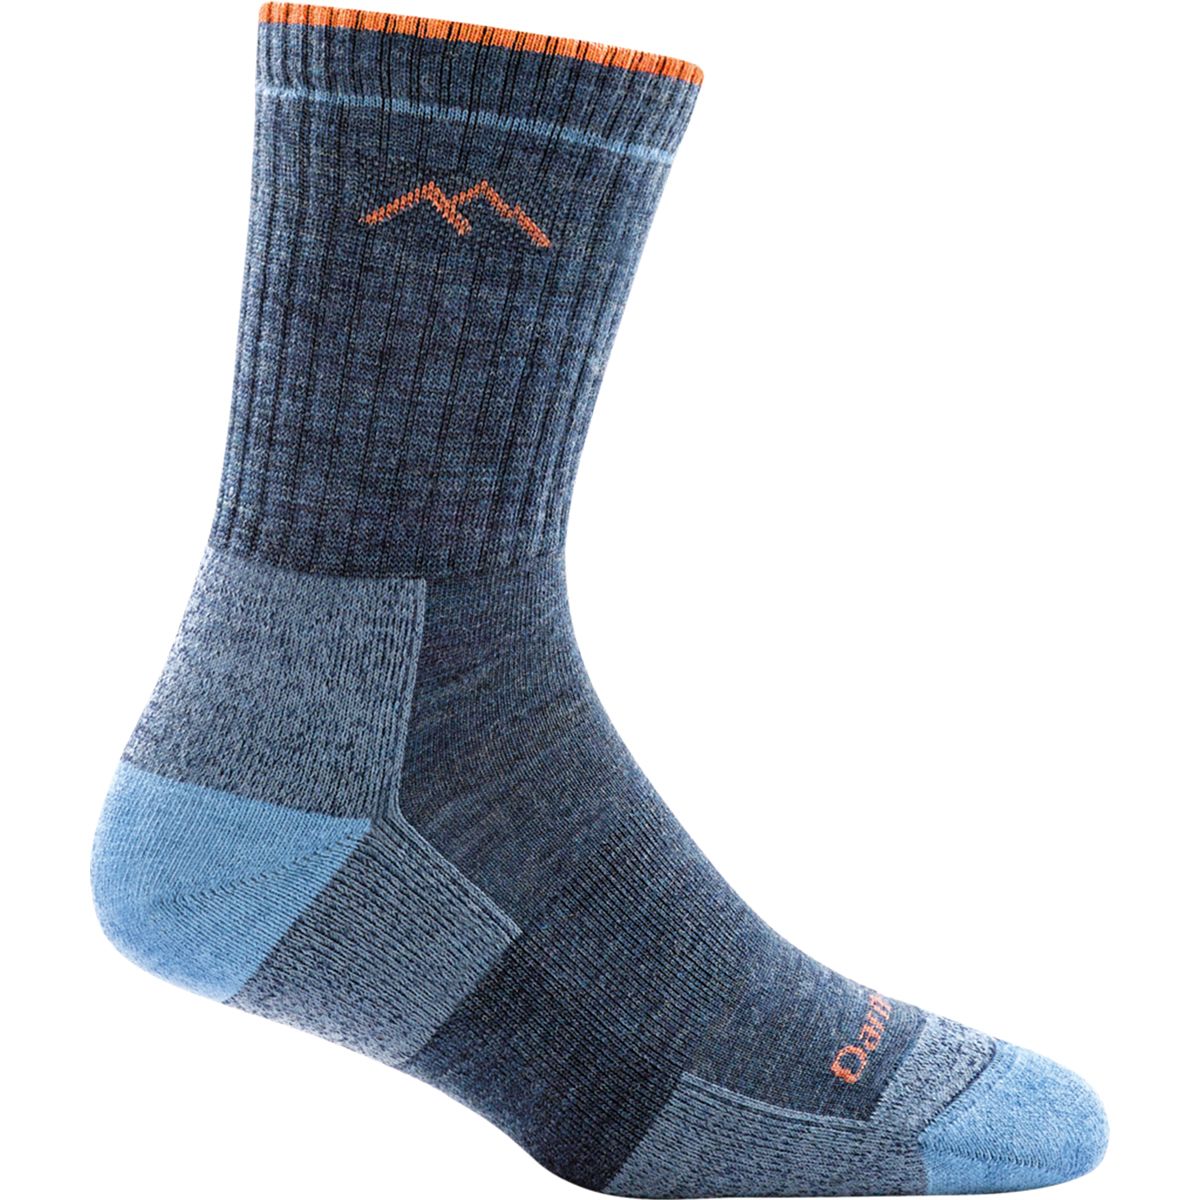 Men's Hiker Micro Crew Midweight Hiking Sock with Cushion